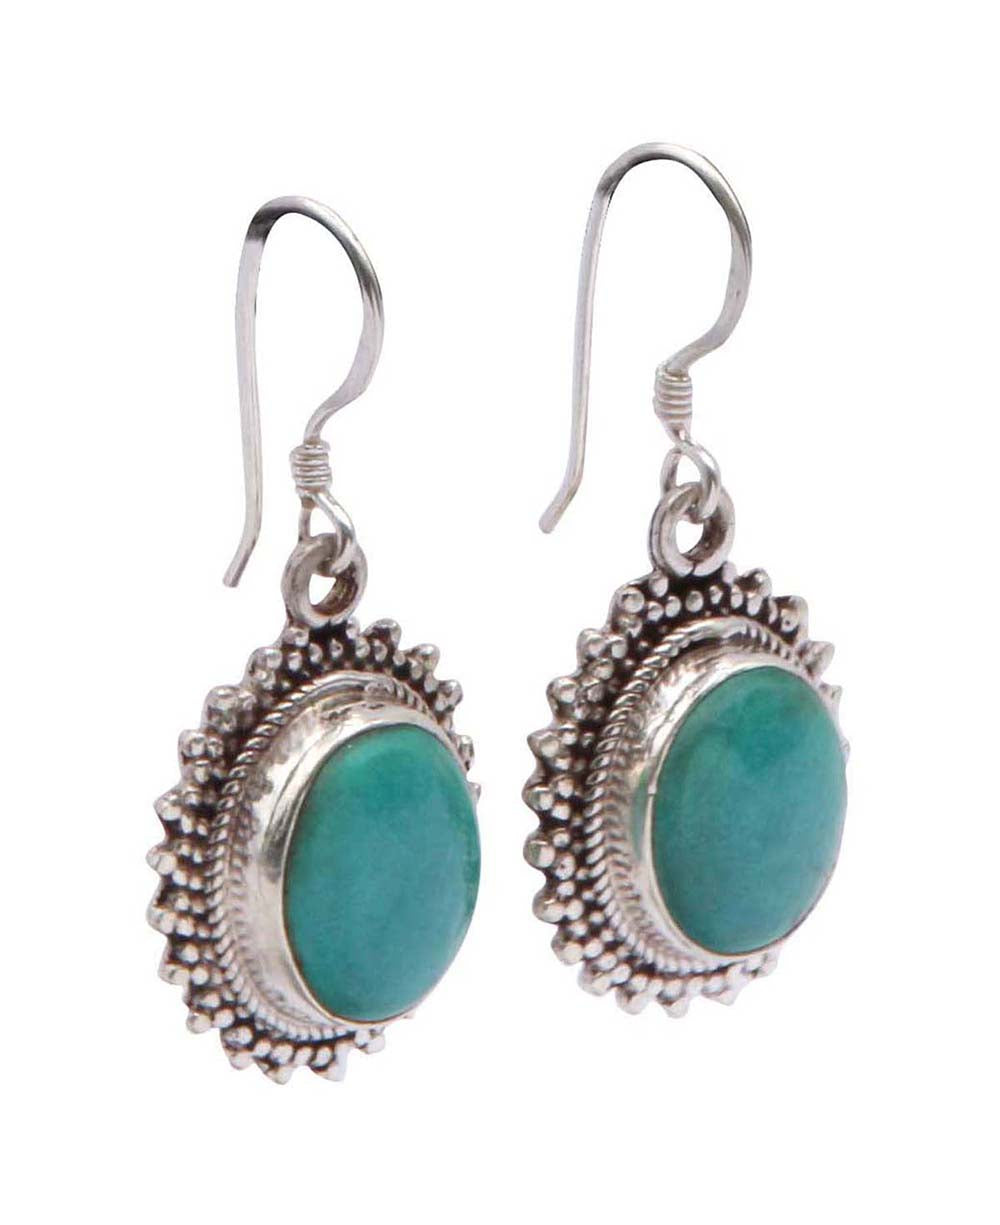 Turquoise Oval Earrings With Sterling Silver